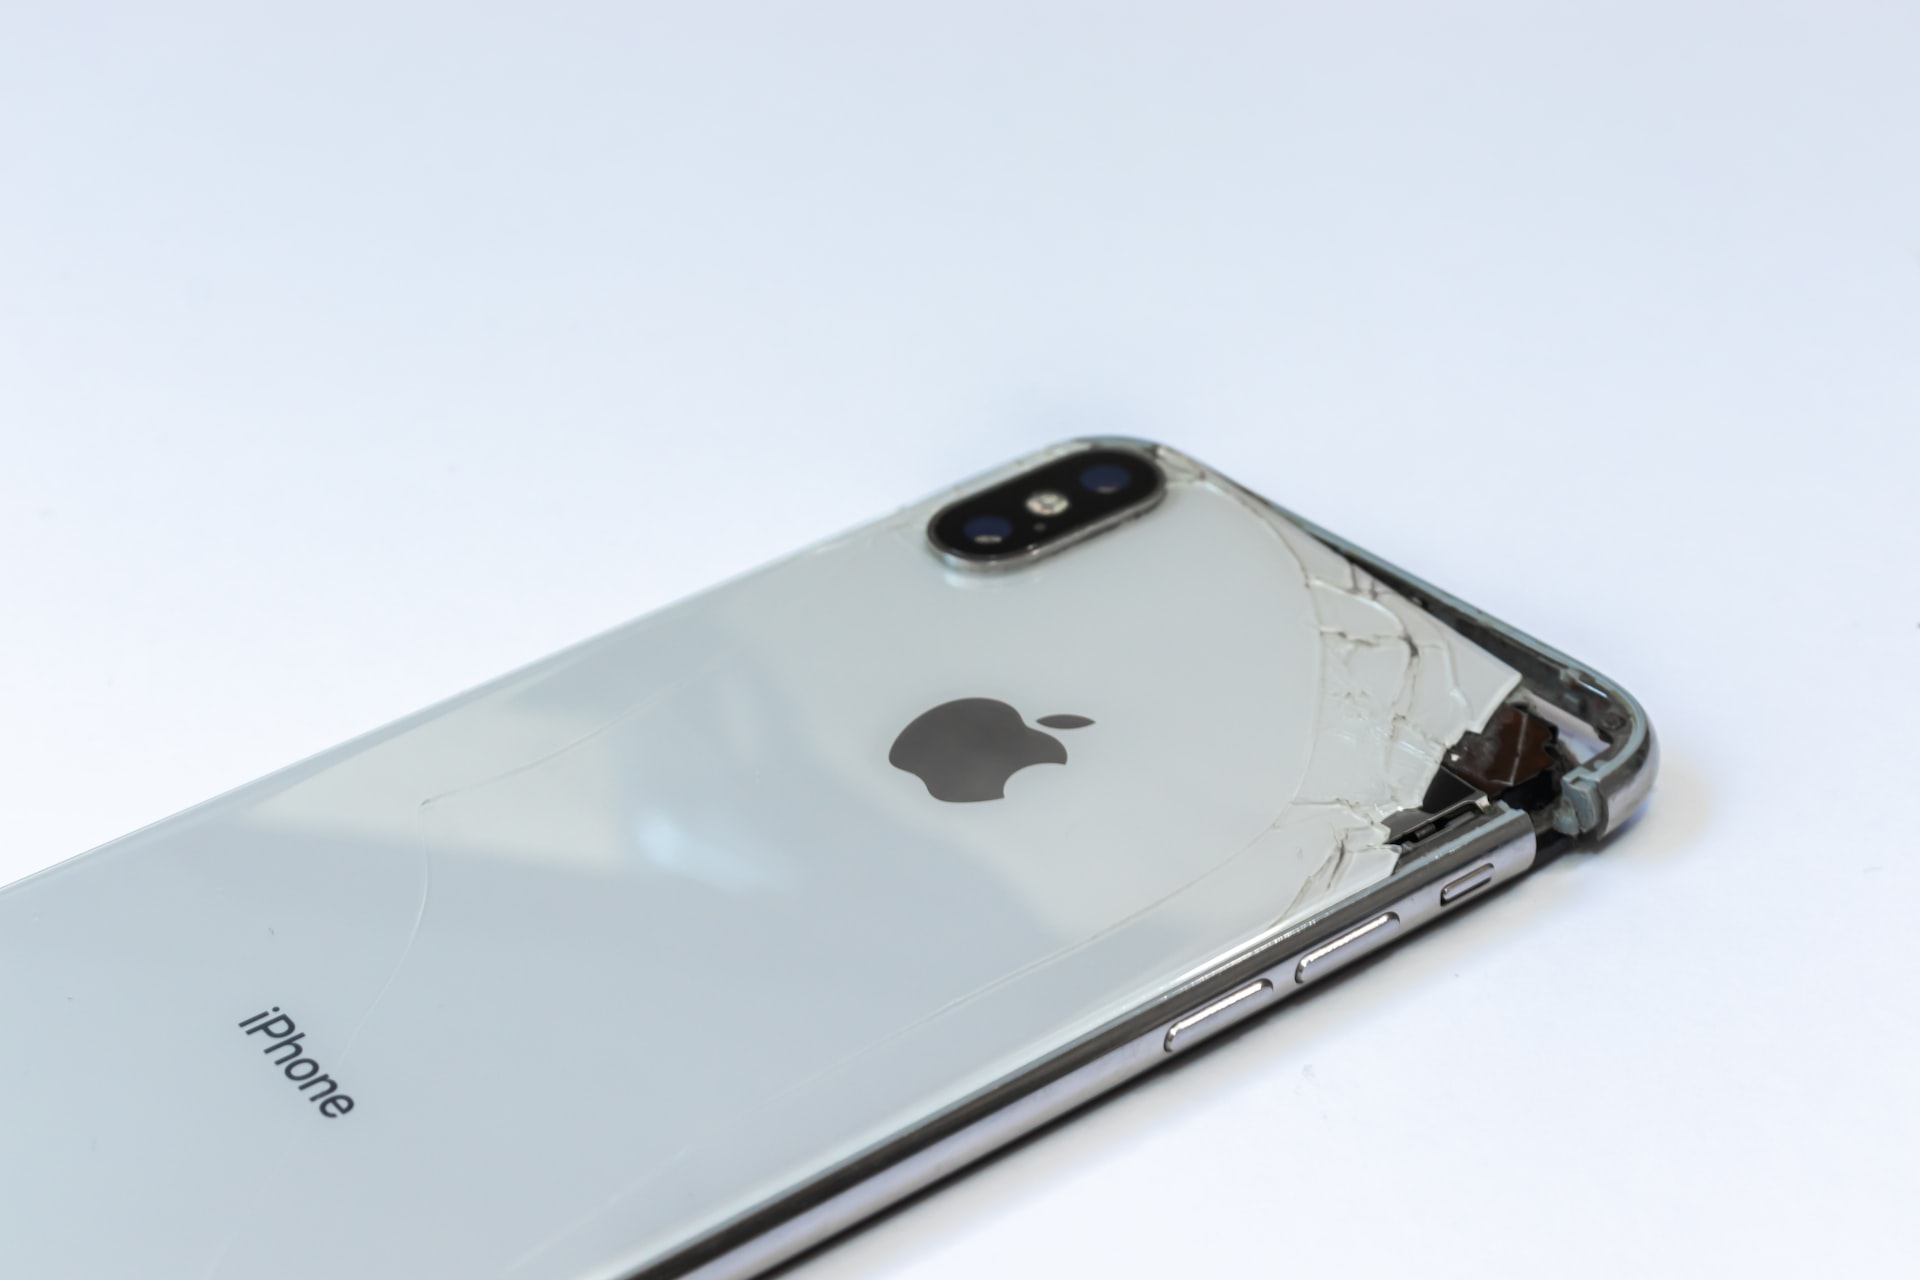 Get your Broken Phone repaired by electronics repair in Dayton, Ohio.